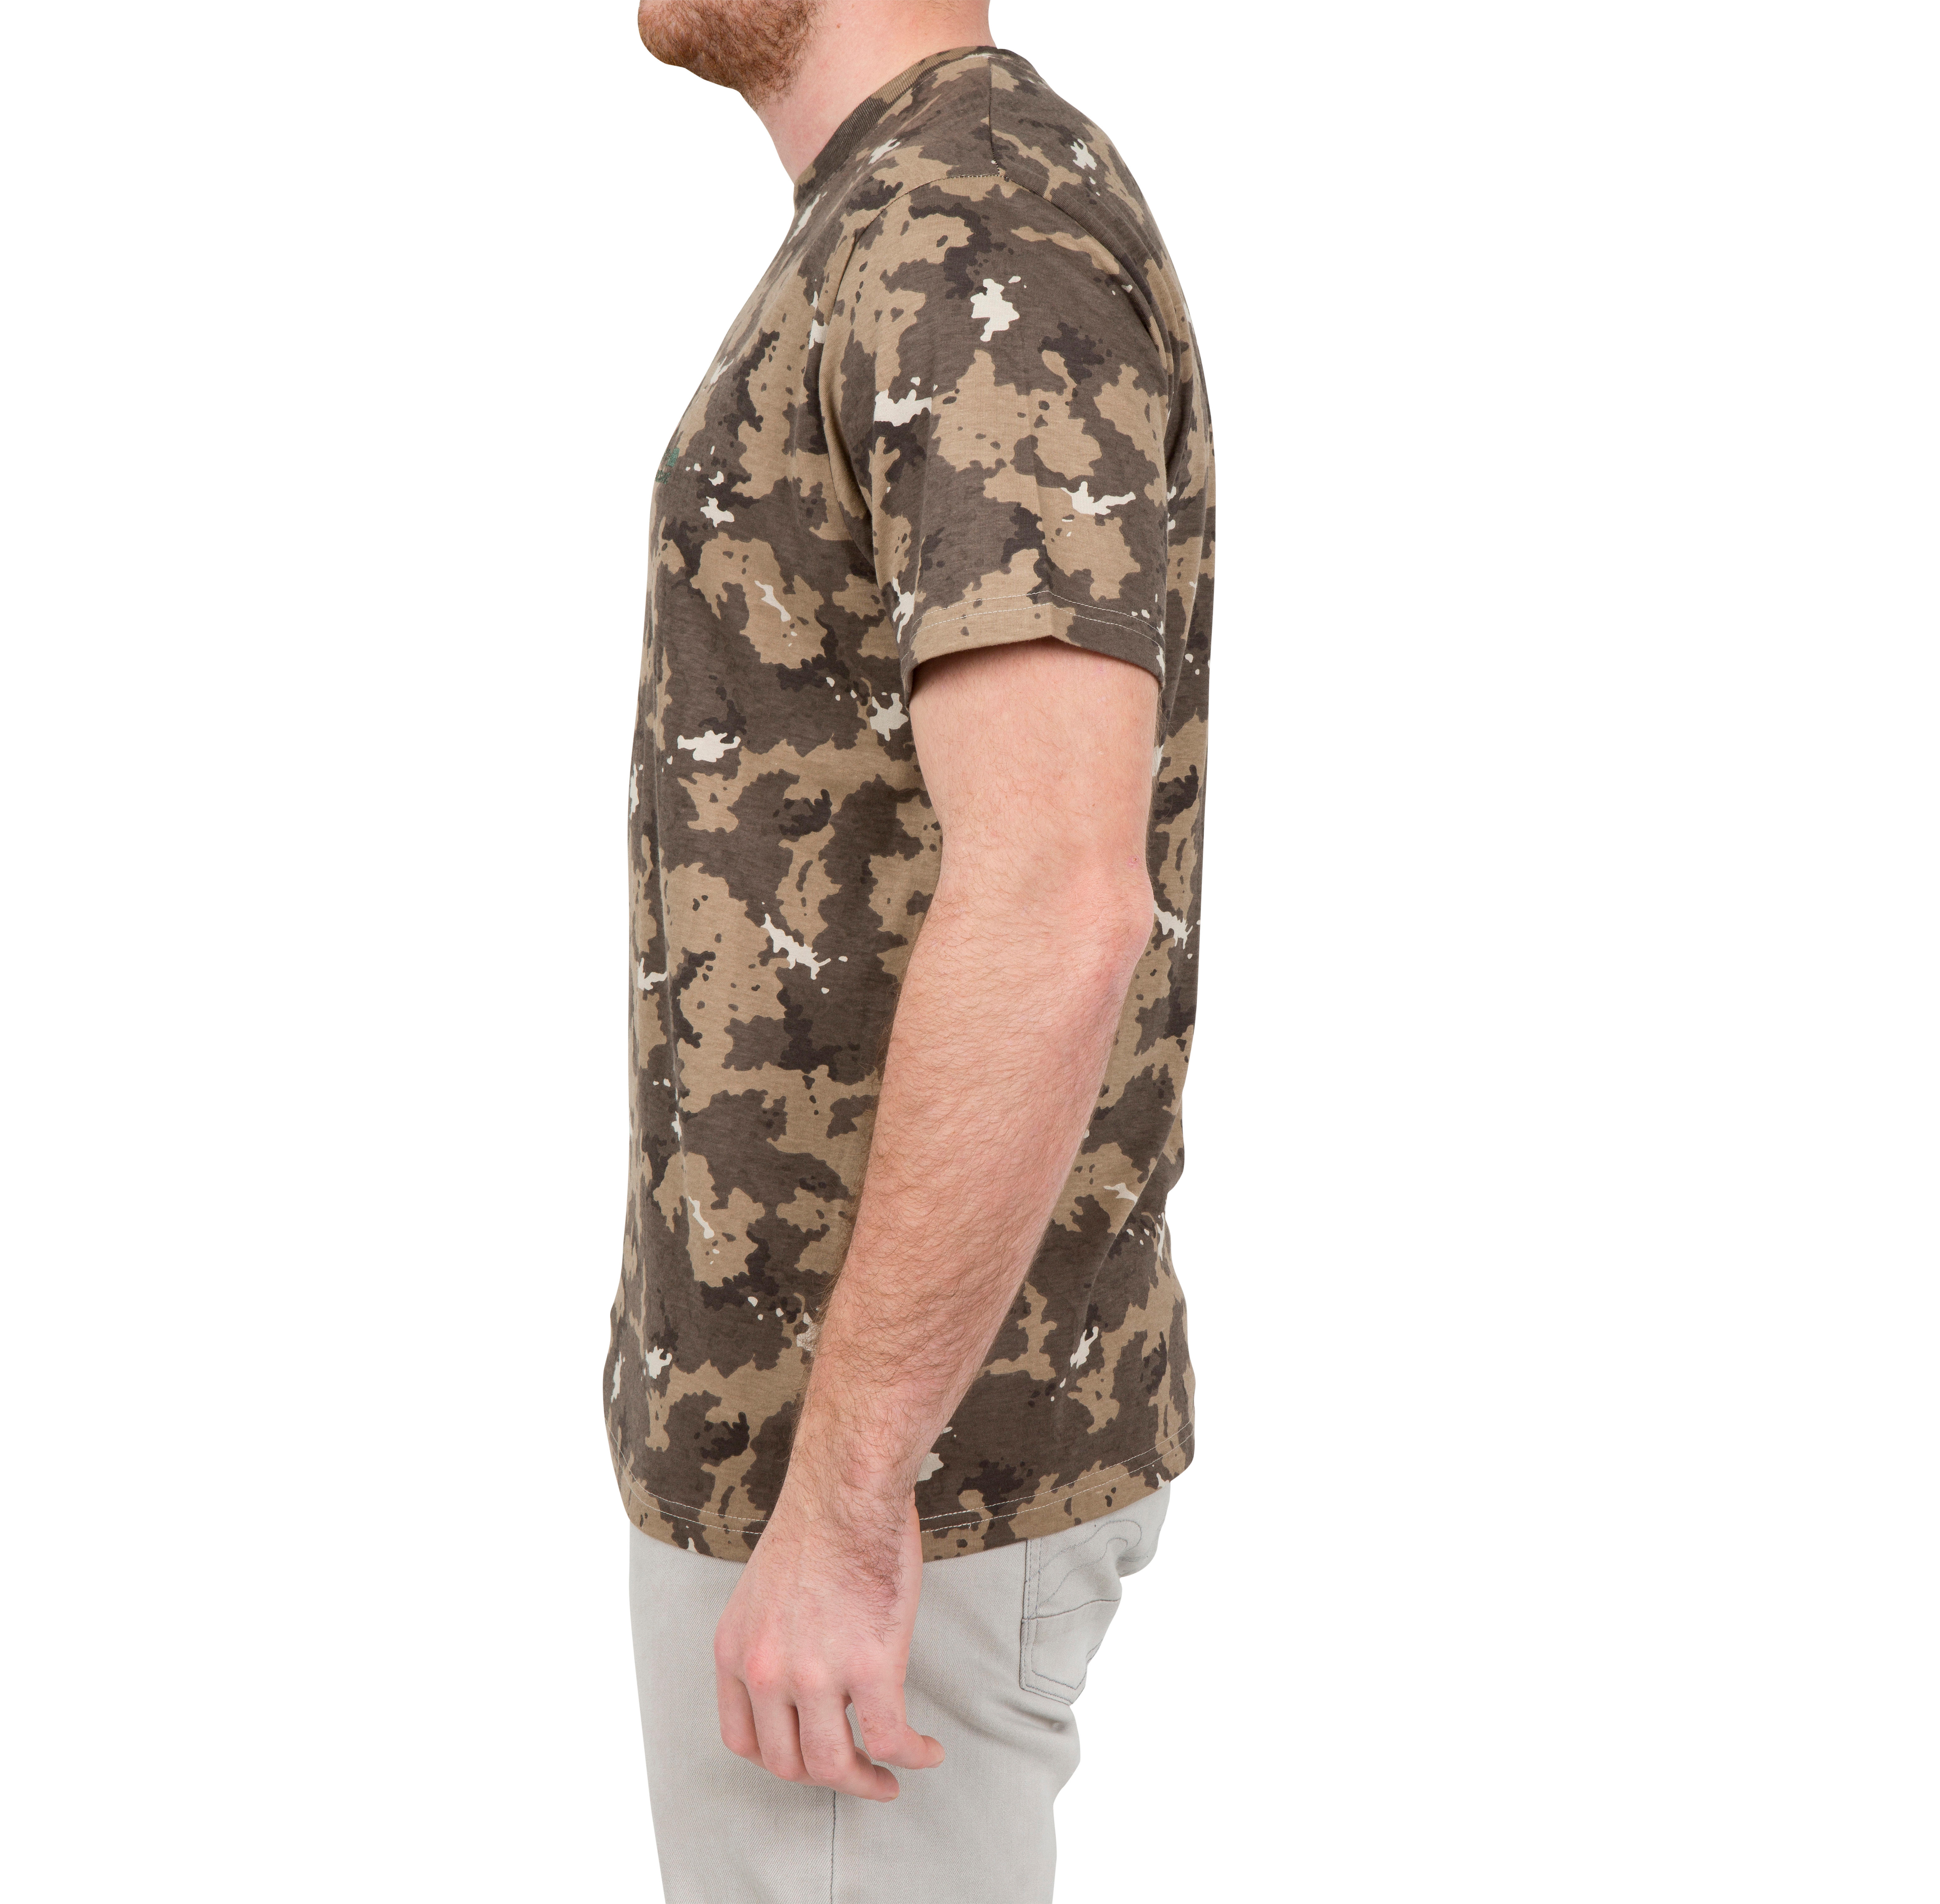 camouflage t shirt for sale philippines